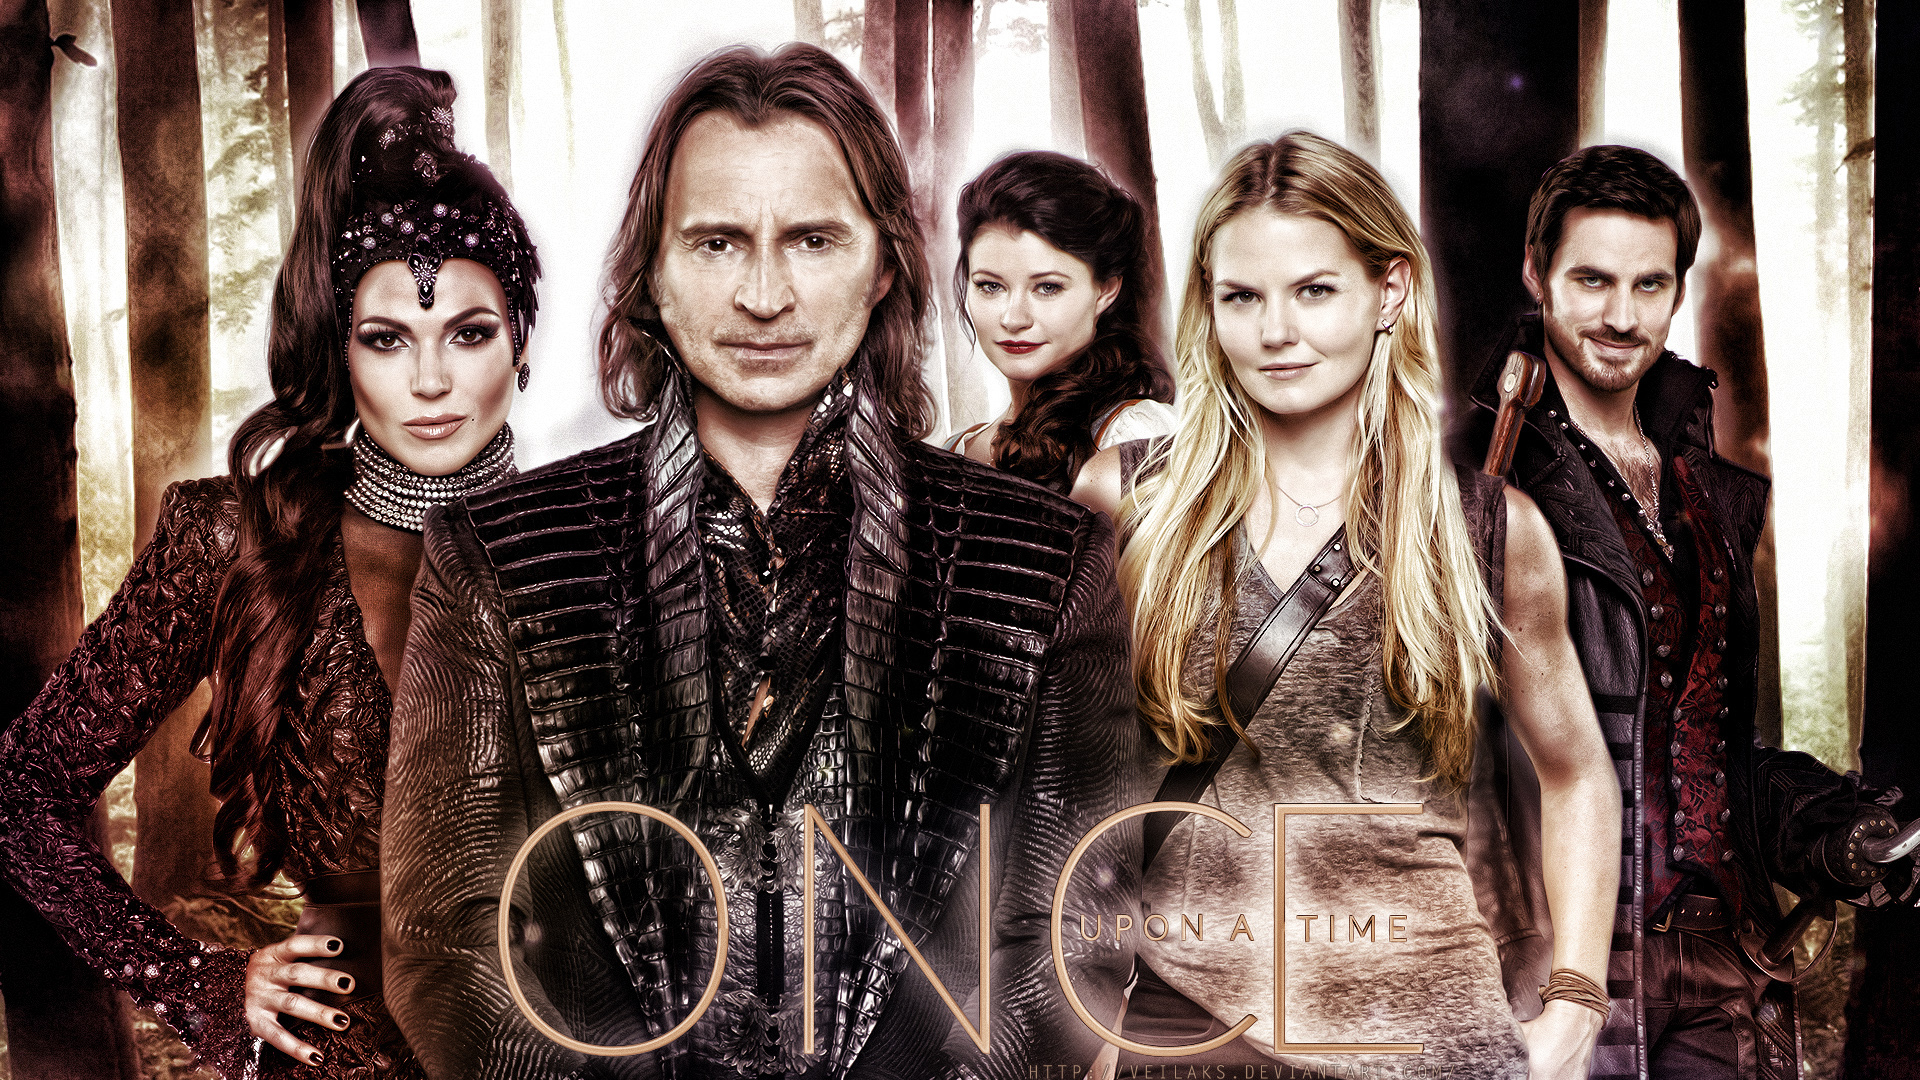 1920x1080 Once Upon A Time Once Upon A Time Wallpaper (36961247) Fanpop